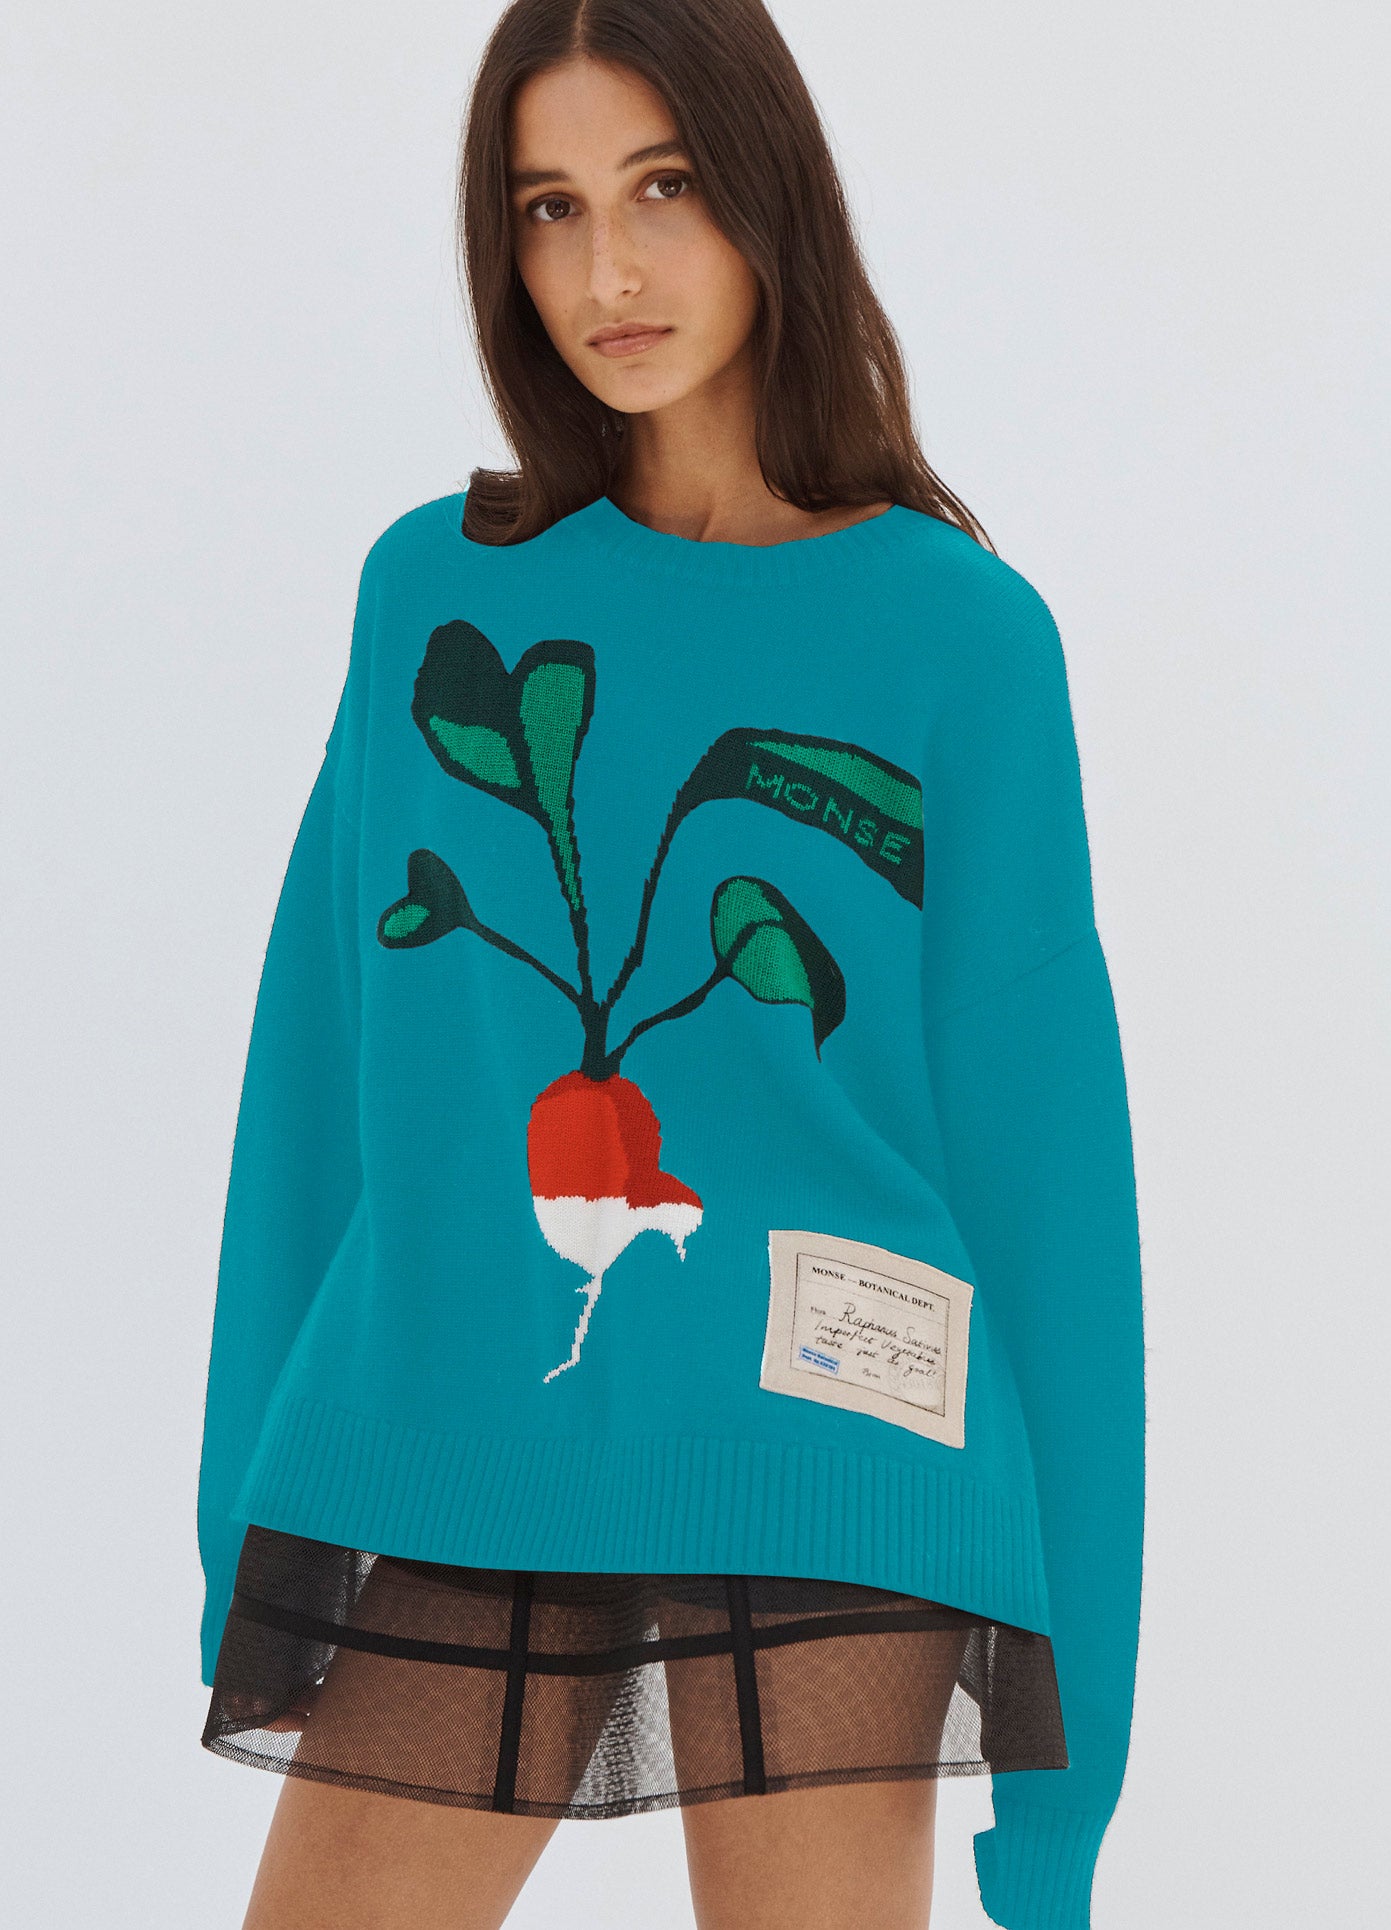 MONSE Ugly Radish Knit Sweater in Ultramarine Blue on Model Front View